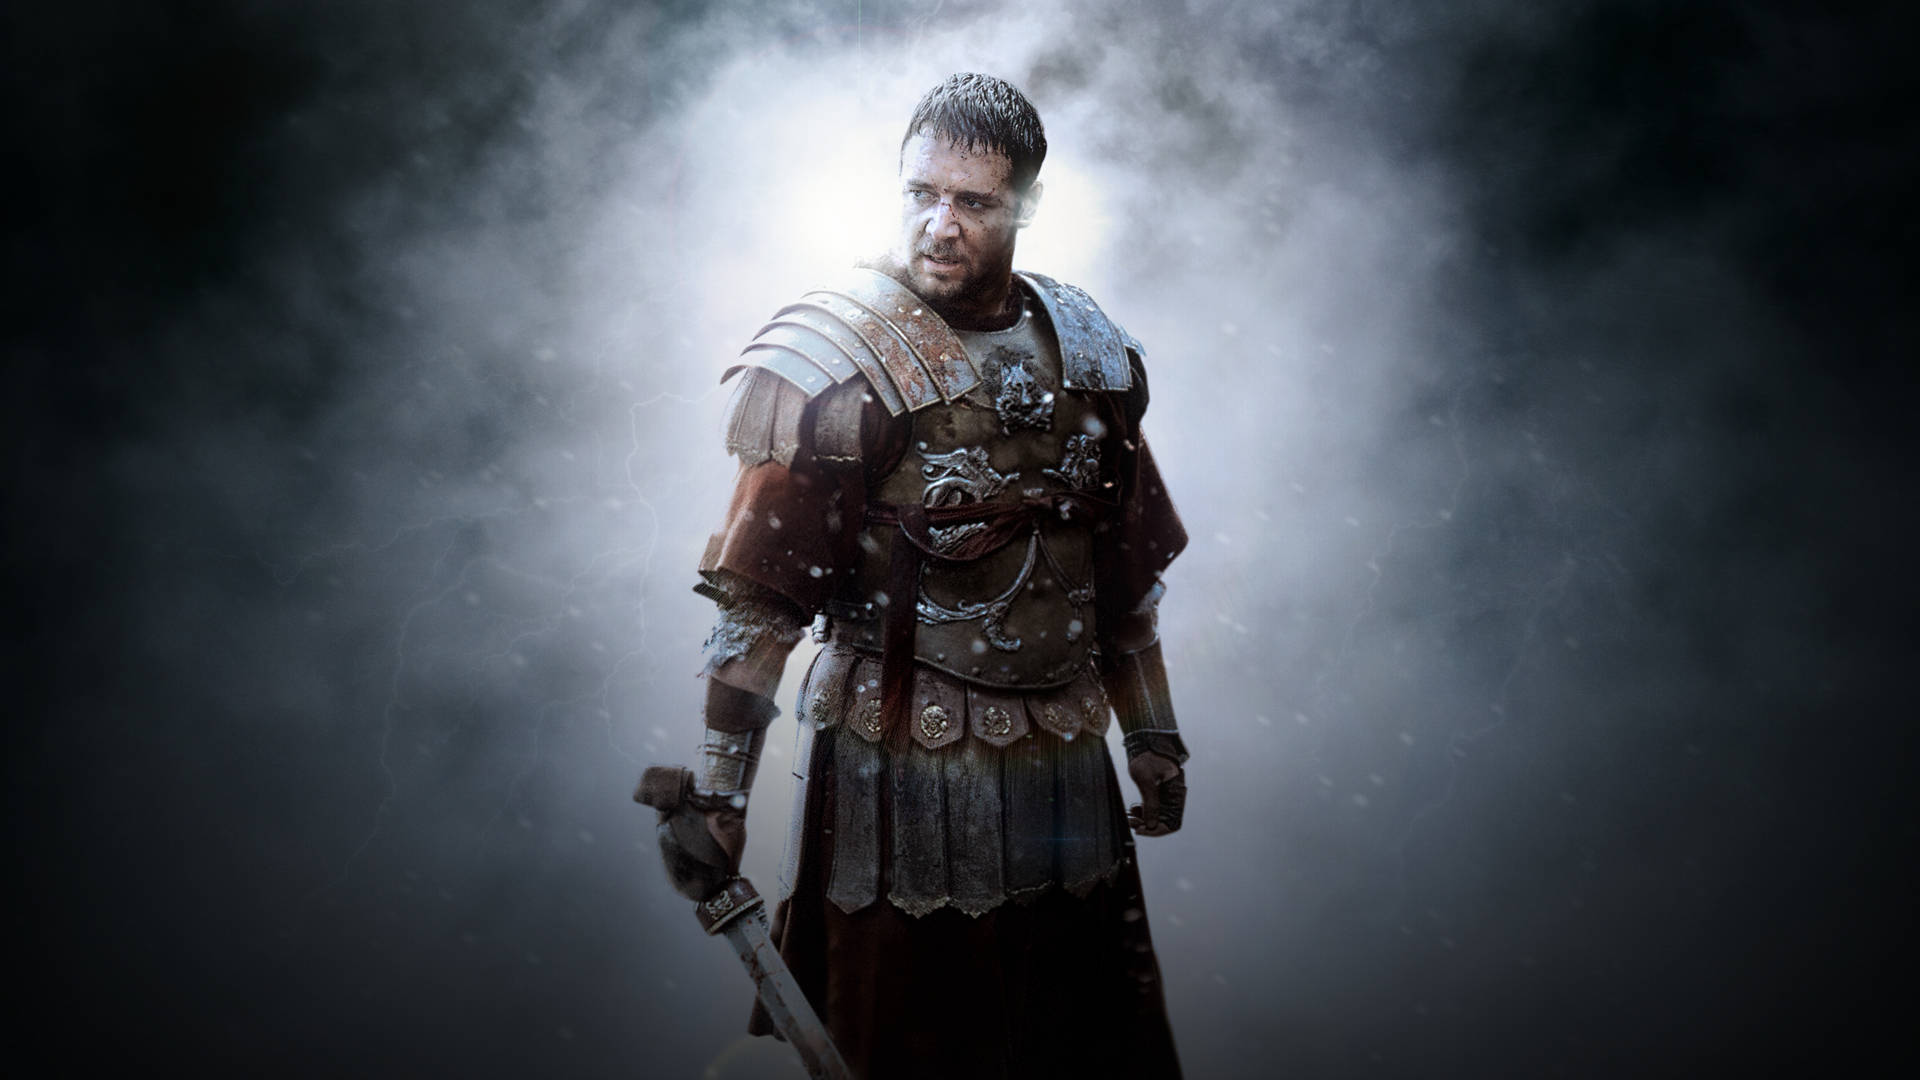 Russell Crowe Gladiator Background